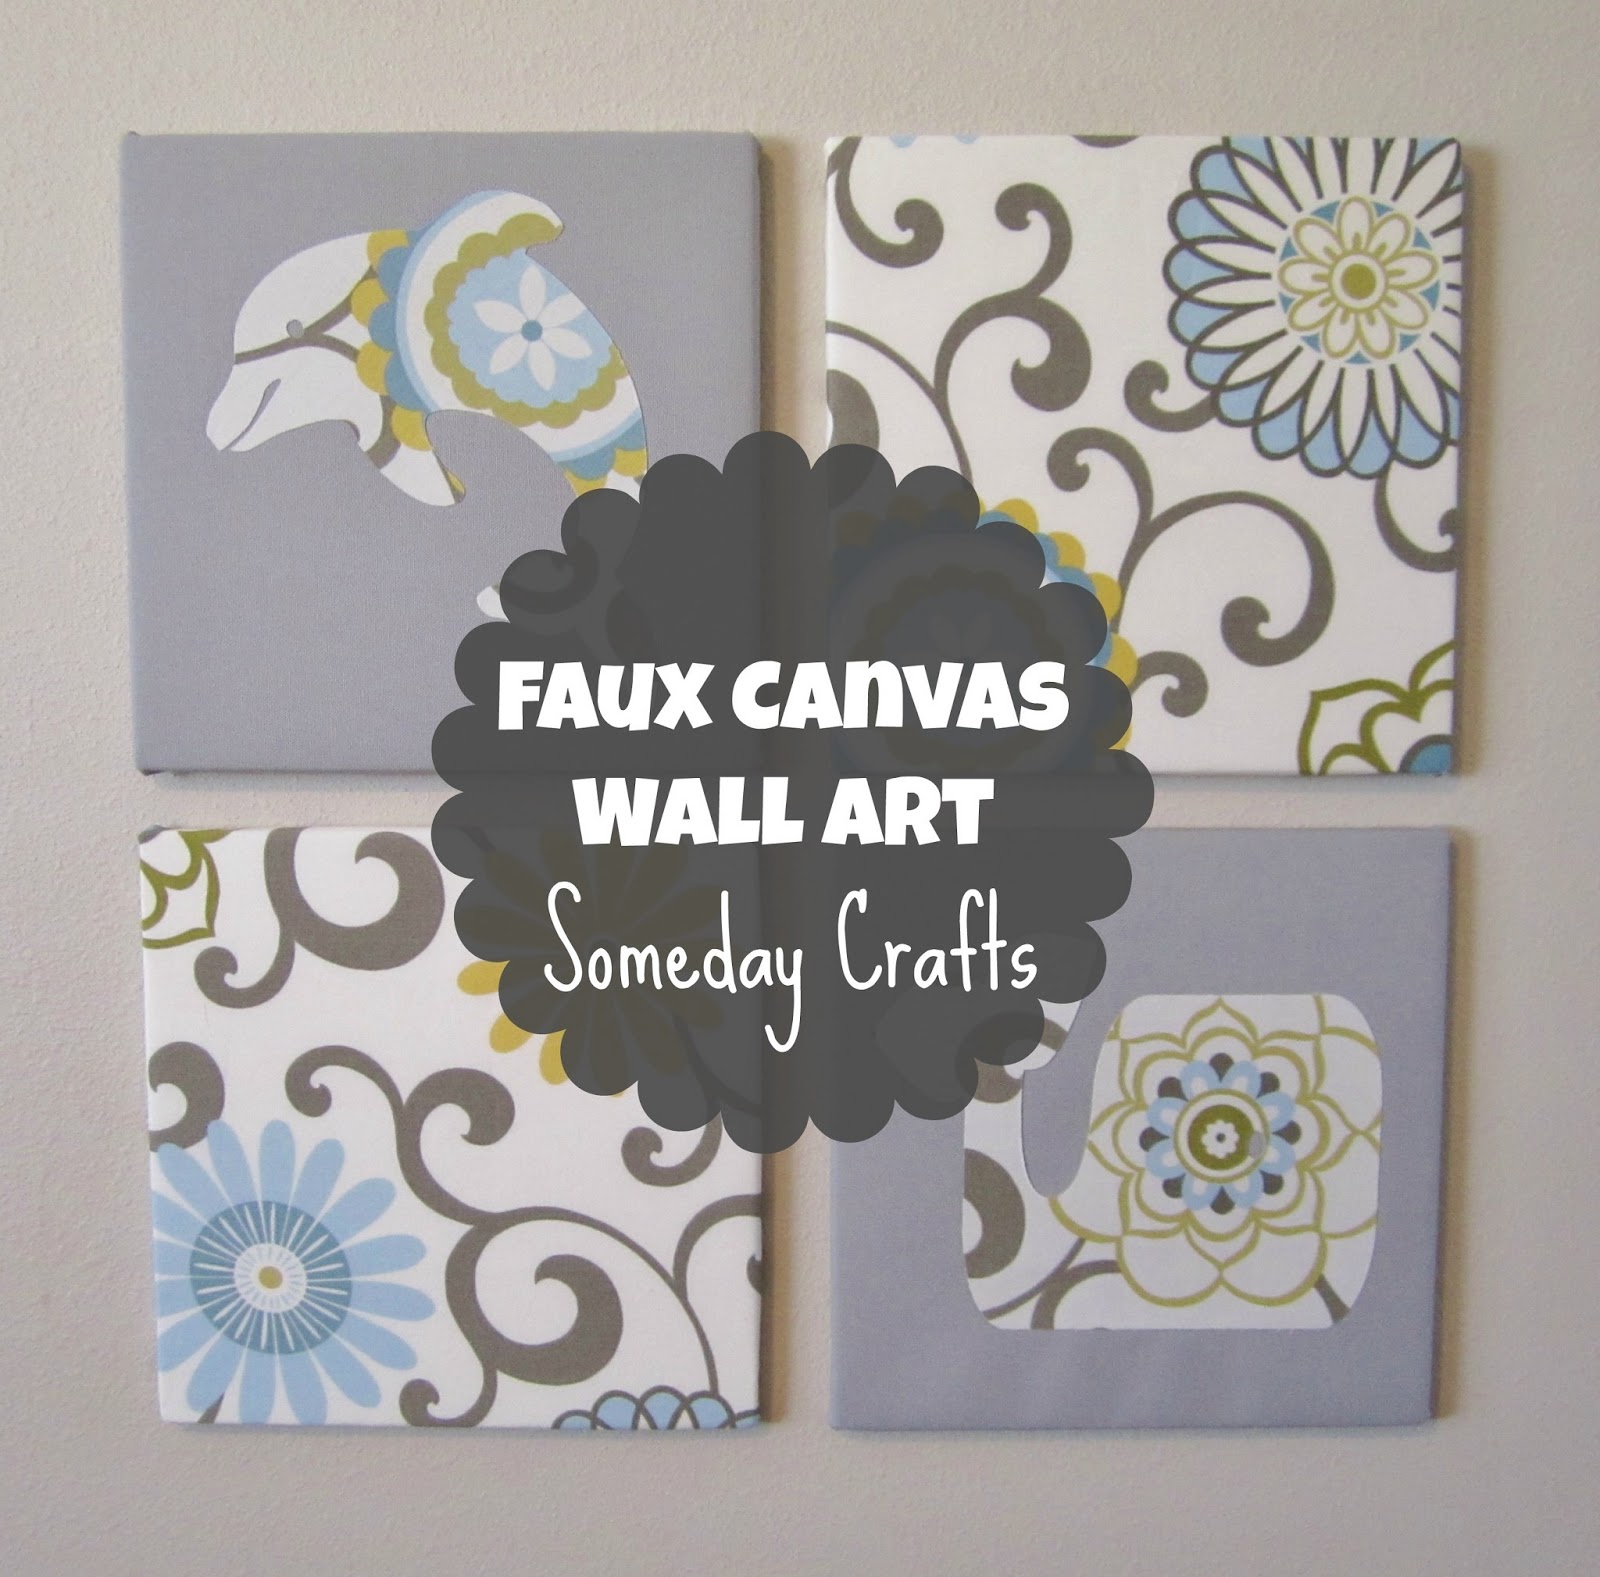 Someday Crafts: Faux Canvas Wall Art